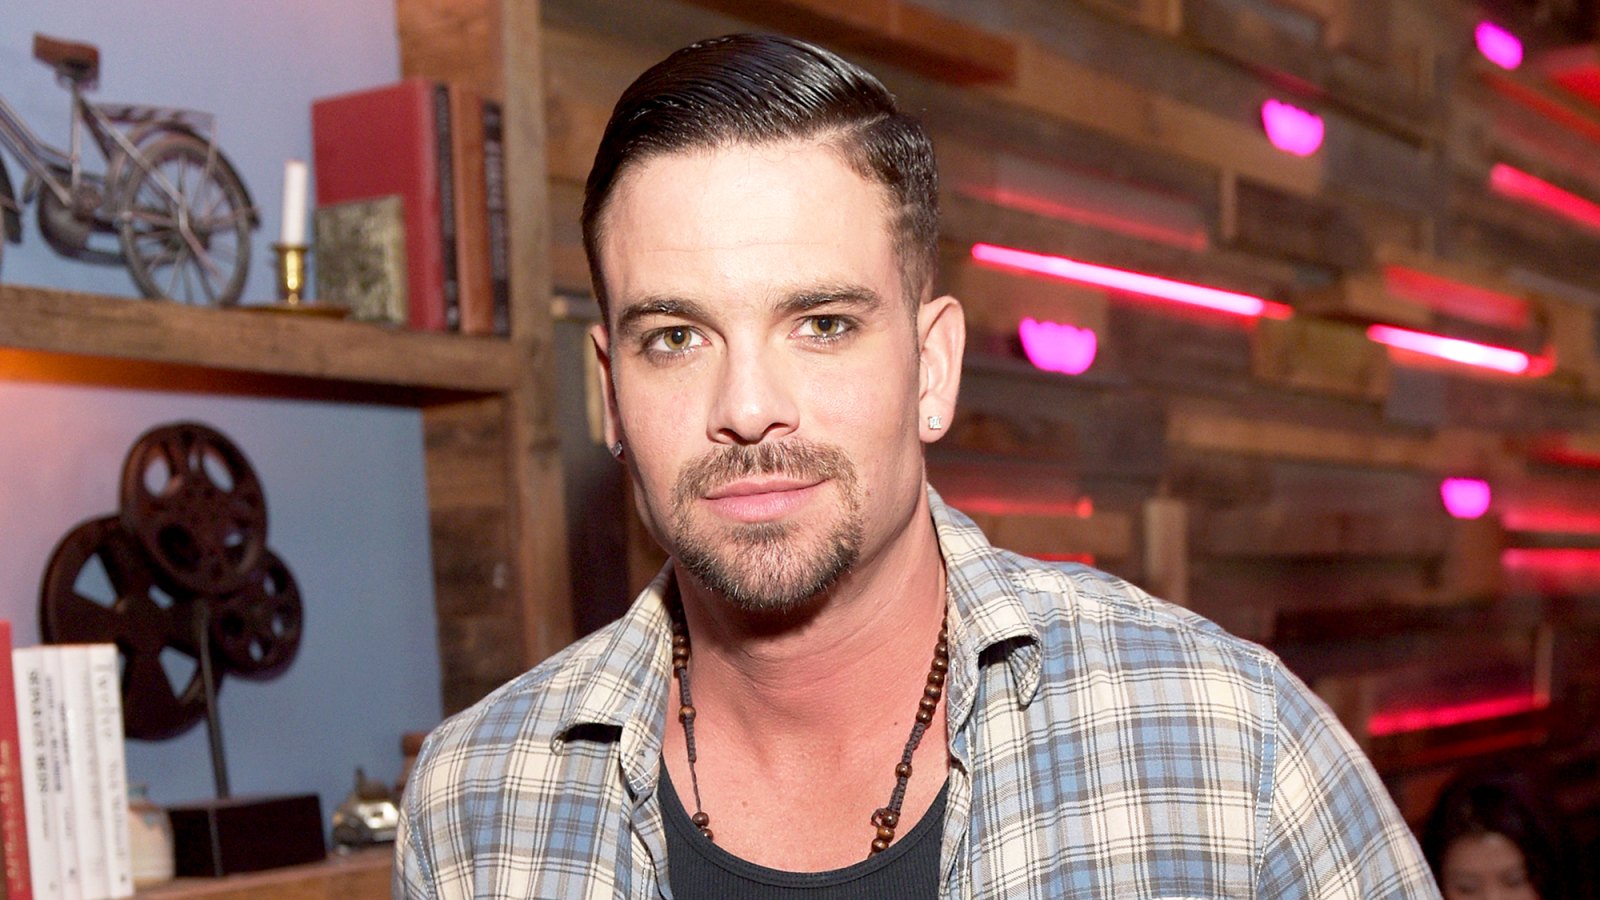 Mark Salling attends the NYLON Young Hollywood 2015 Party at HYDE Sunset: Kitchen + Cocktails in West Hollywood, California.